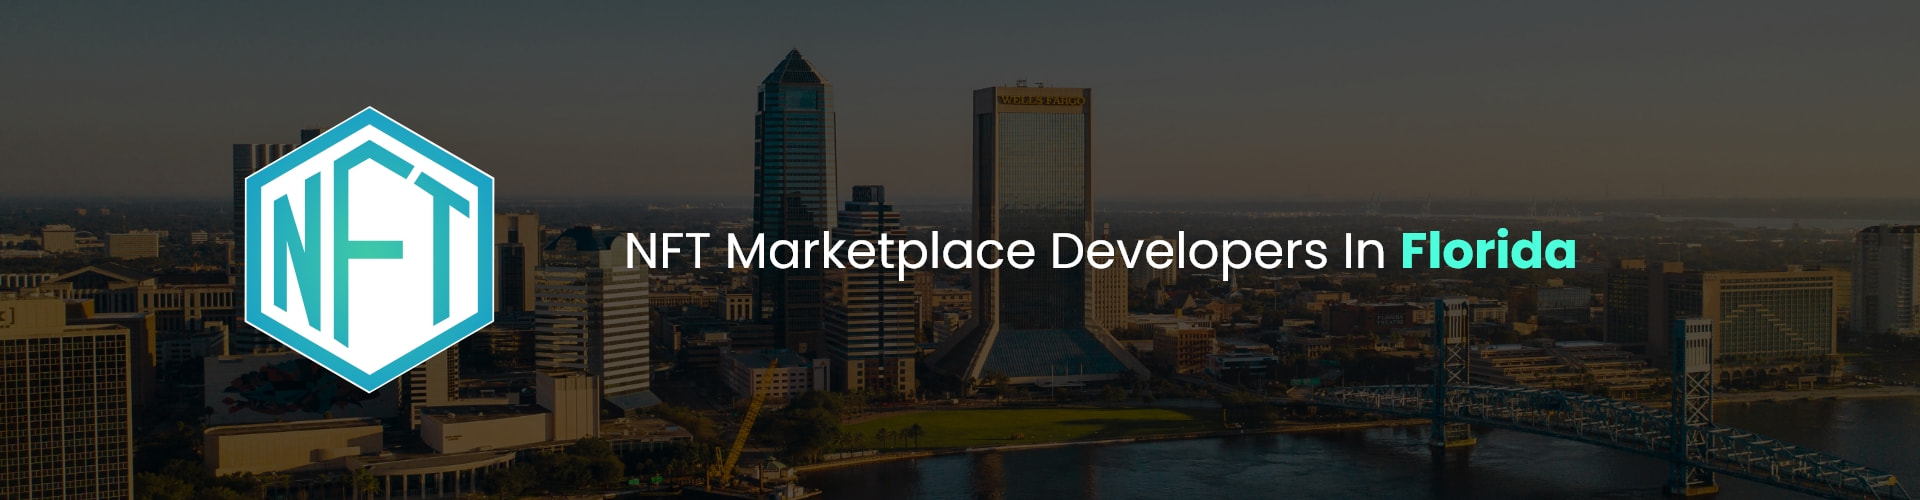 hire nft marketplace developers in florida